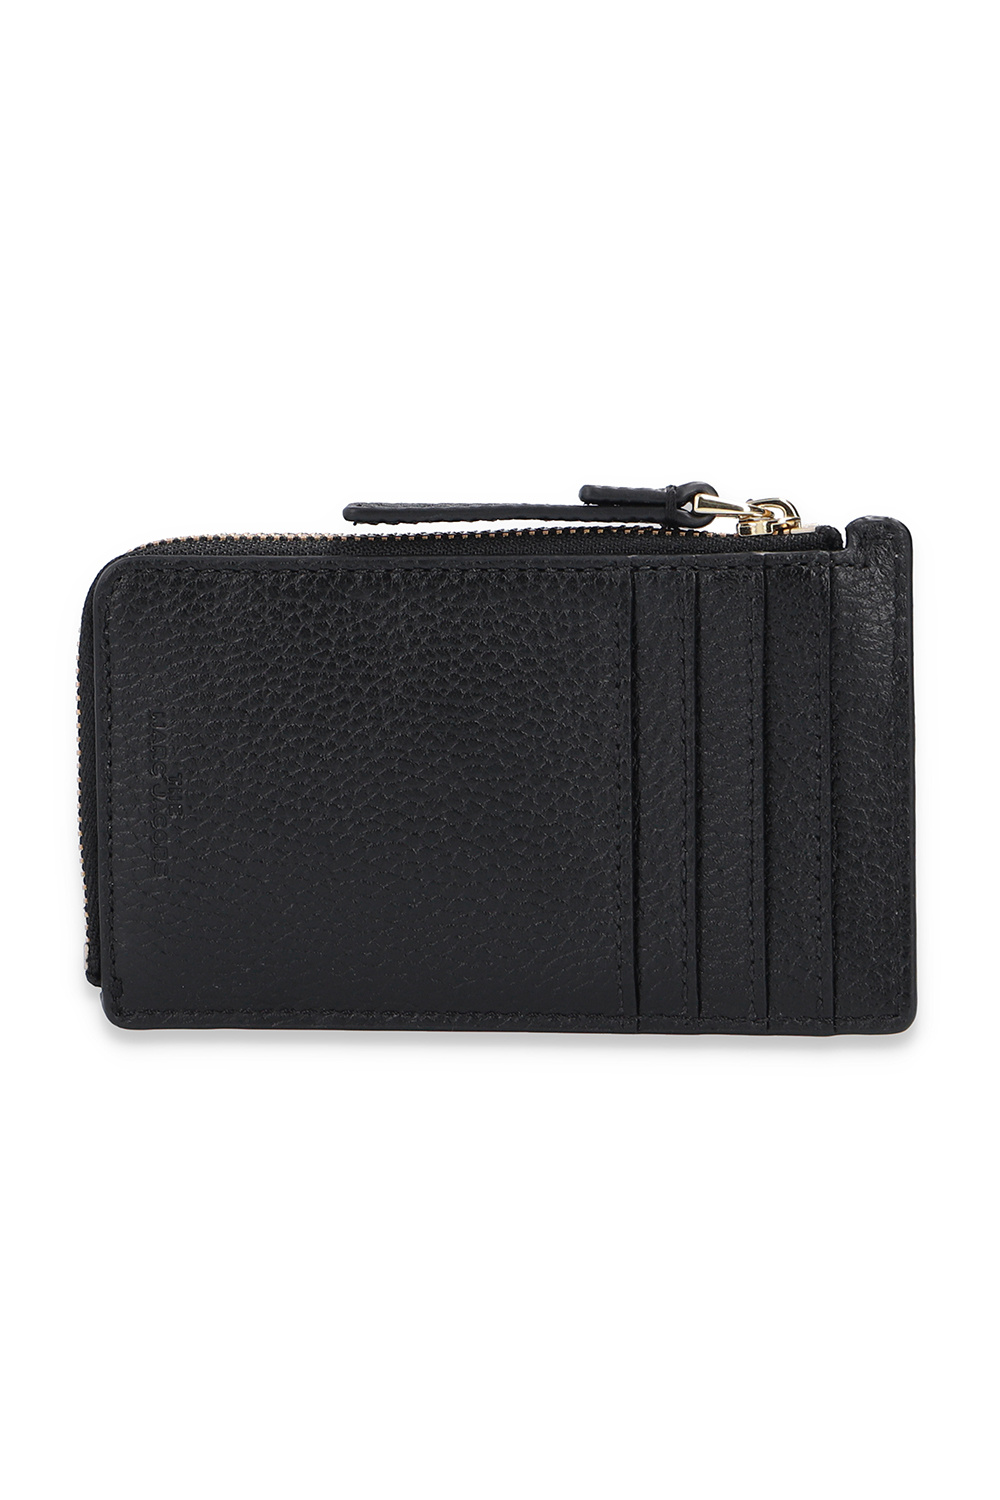 Marc Jacobs Card case with logo | Women's Accessories | Vitkac